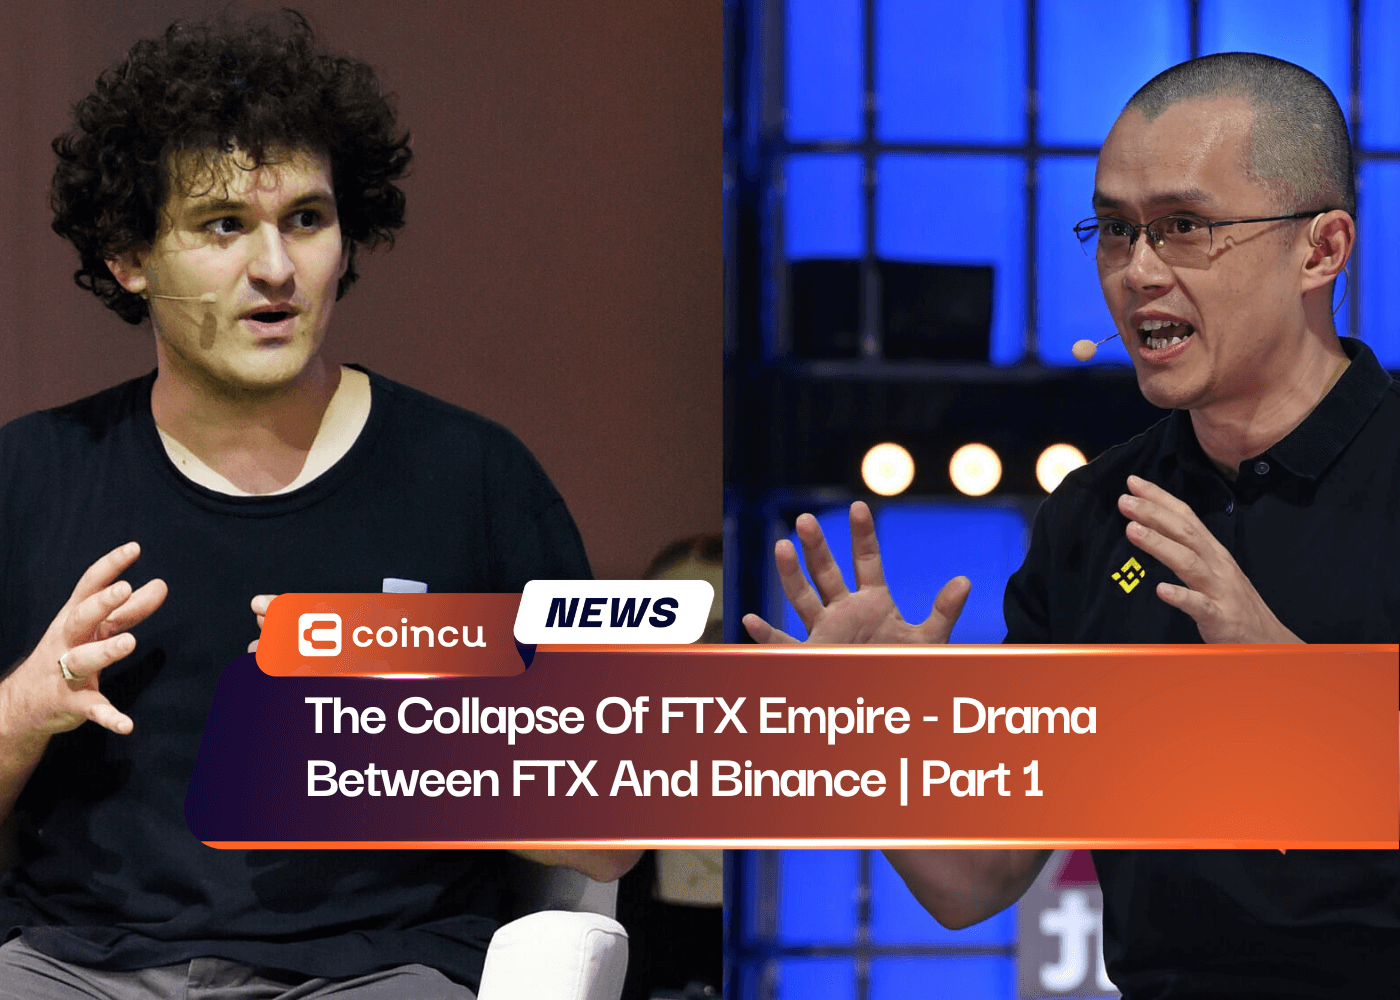 The Collapse Of FTX Empire - Drama Between FTX And Binance | Part 1